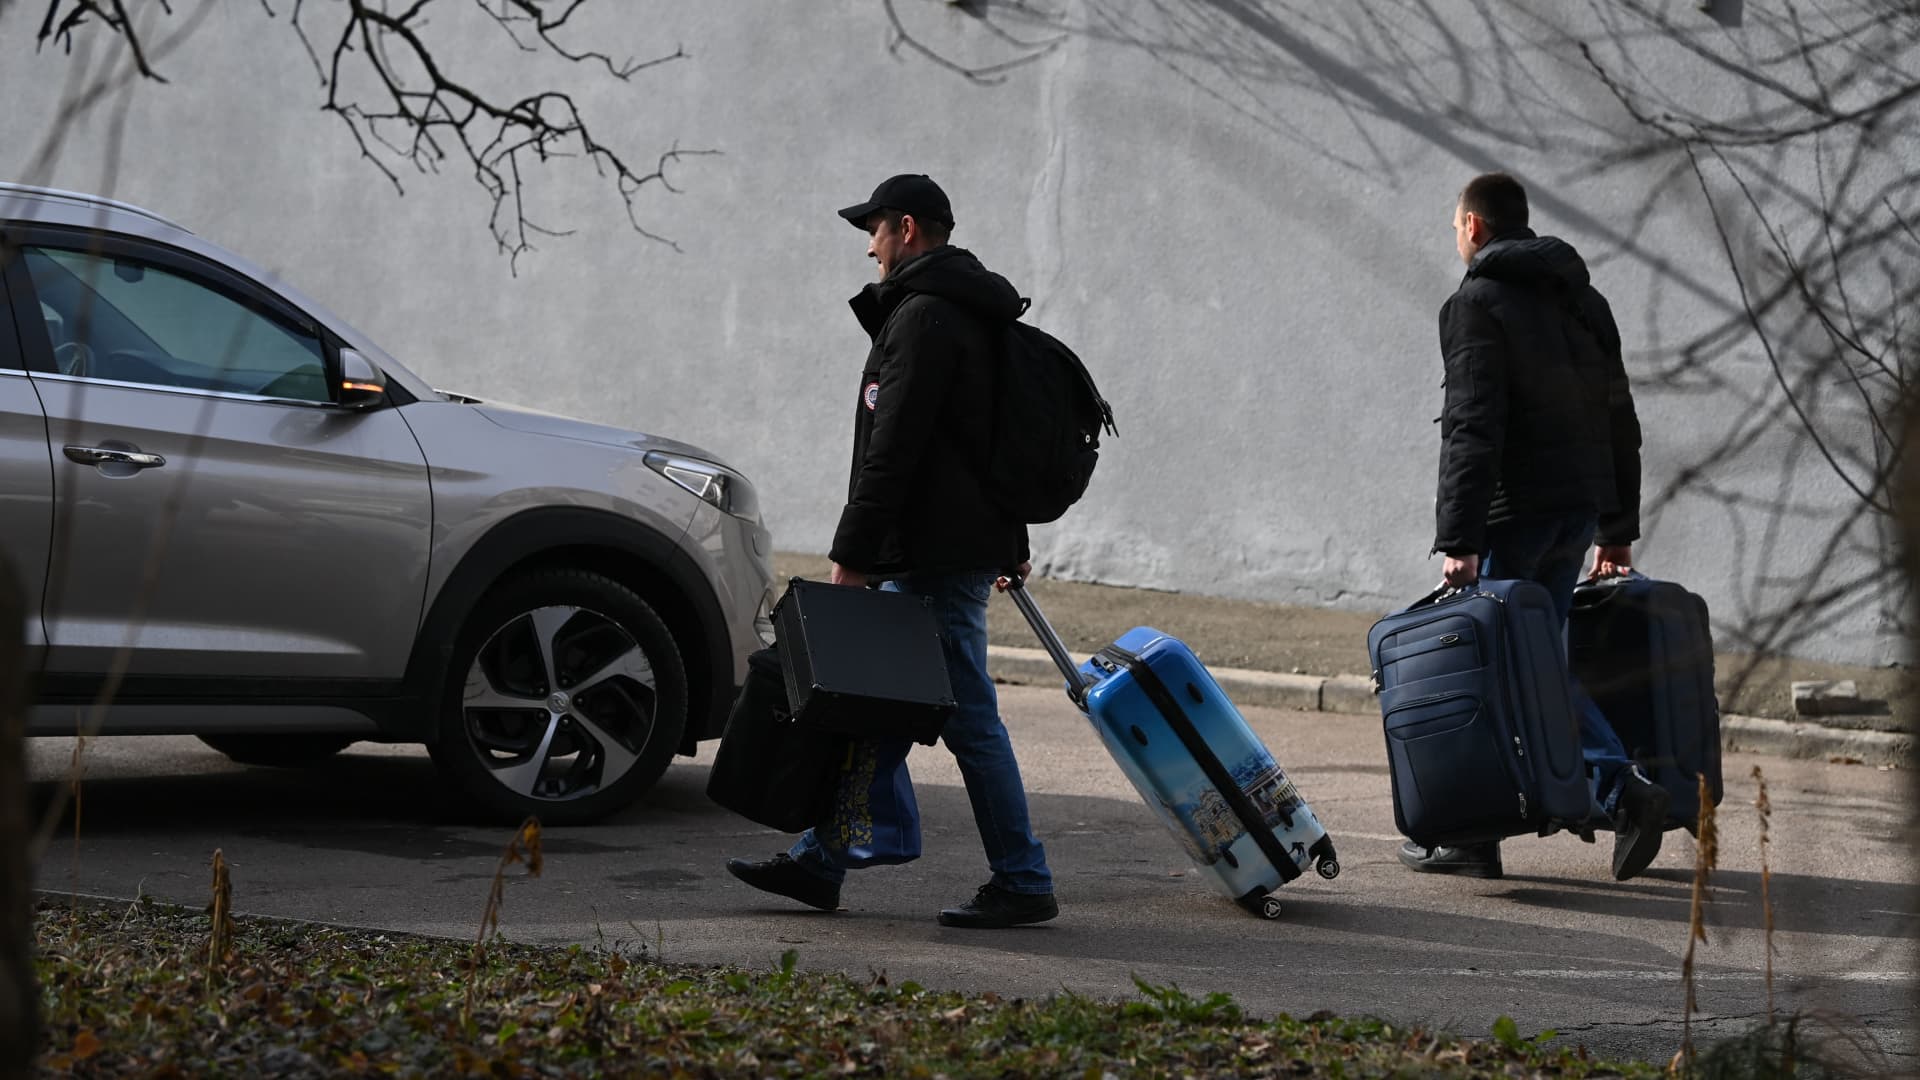 Workers leave the Russian Embassy in Kyiv with their materials, on February 23, 2022.